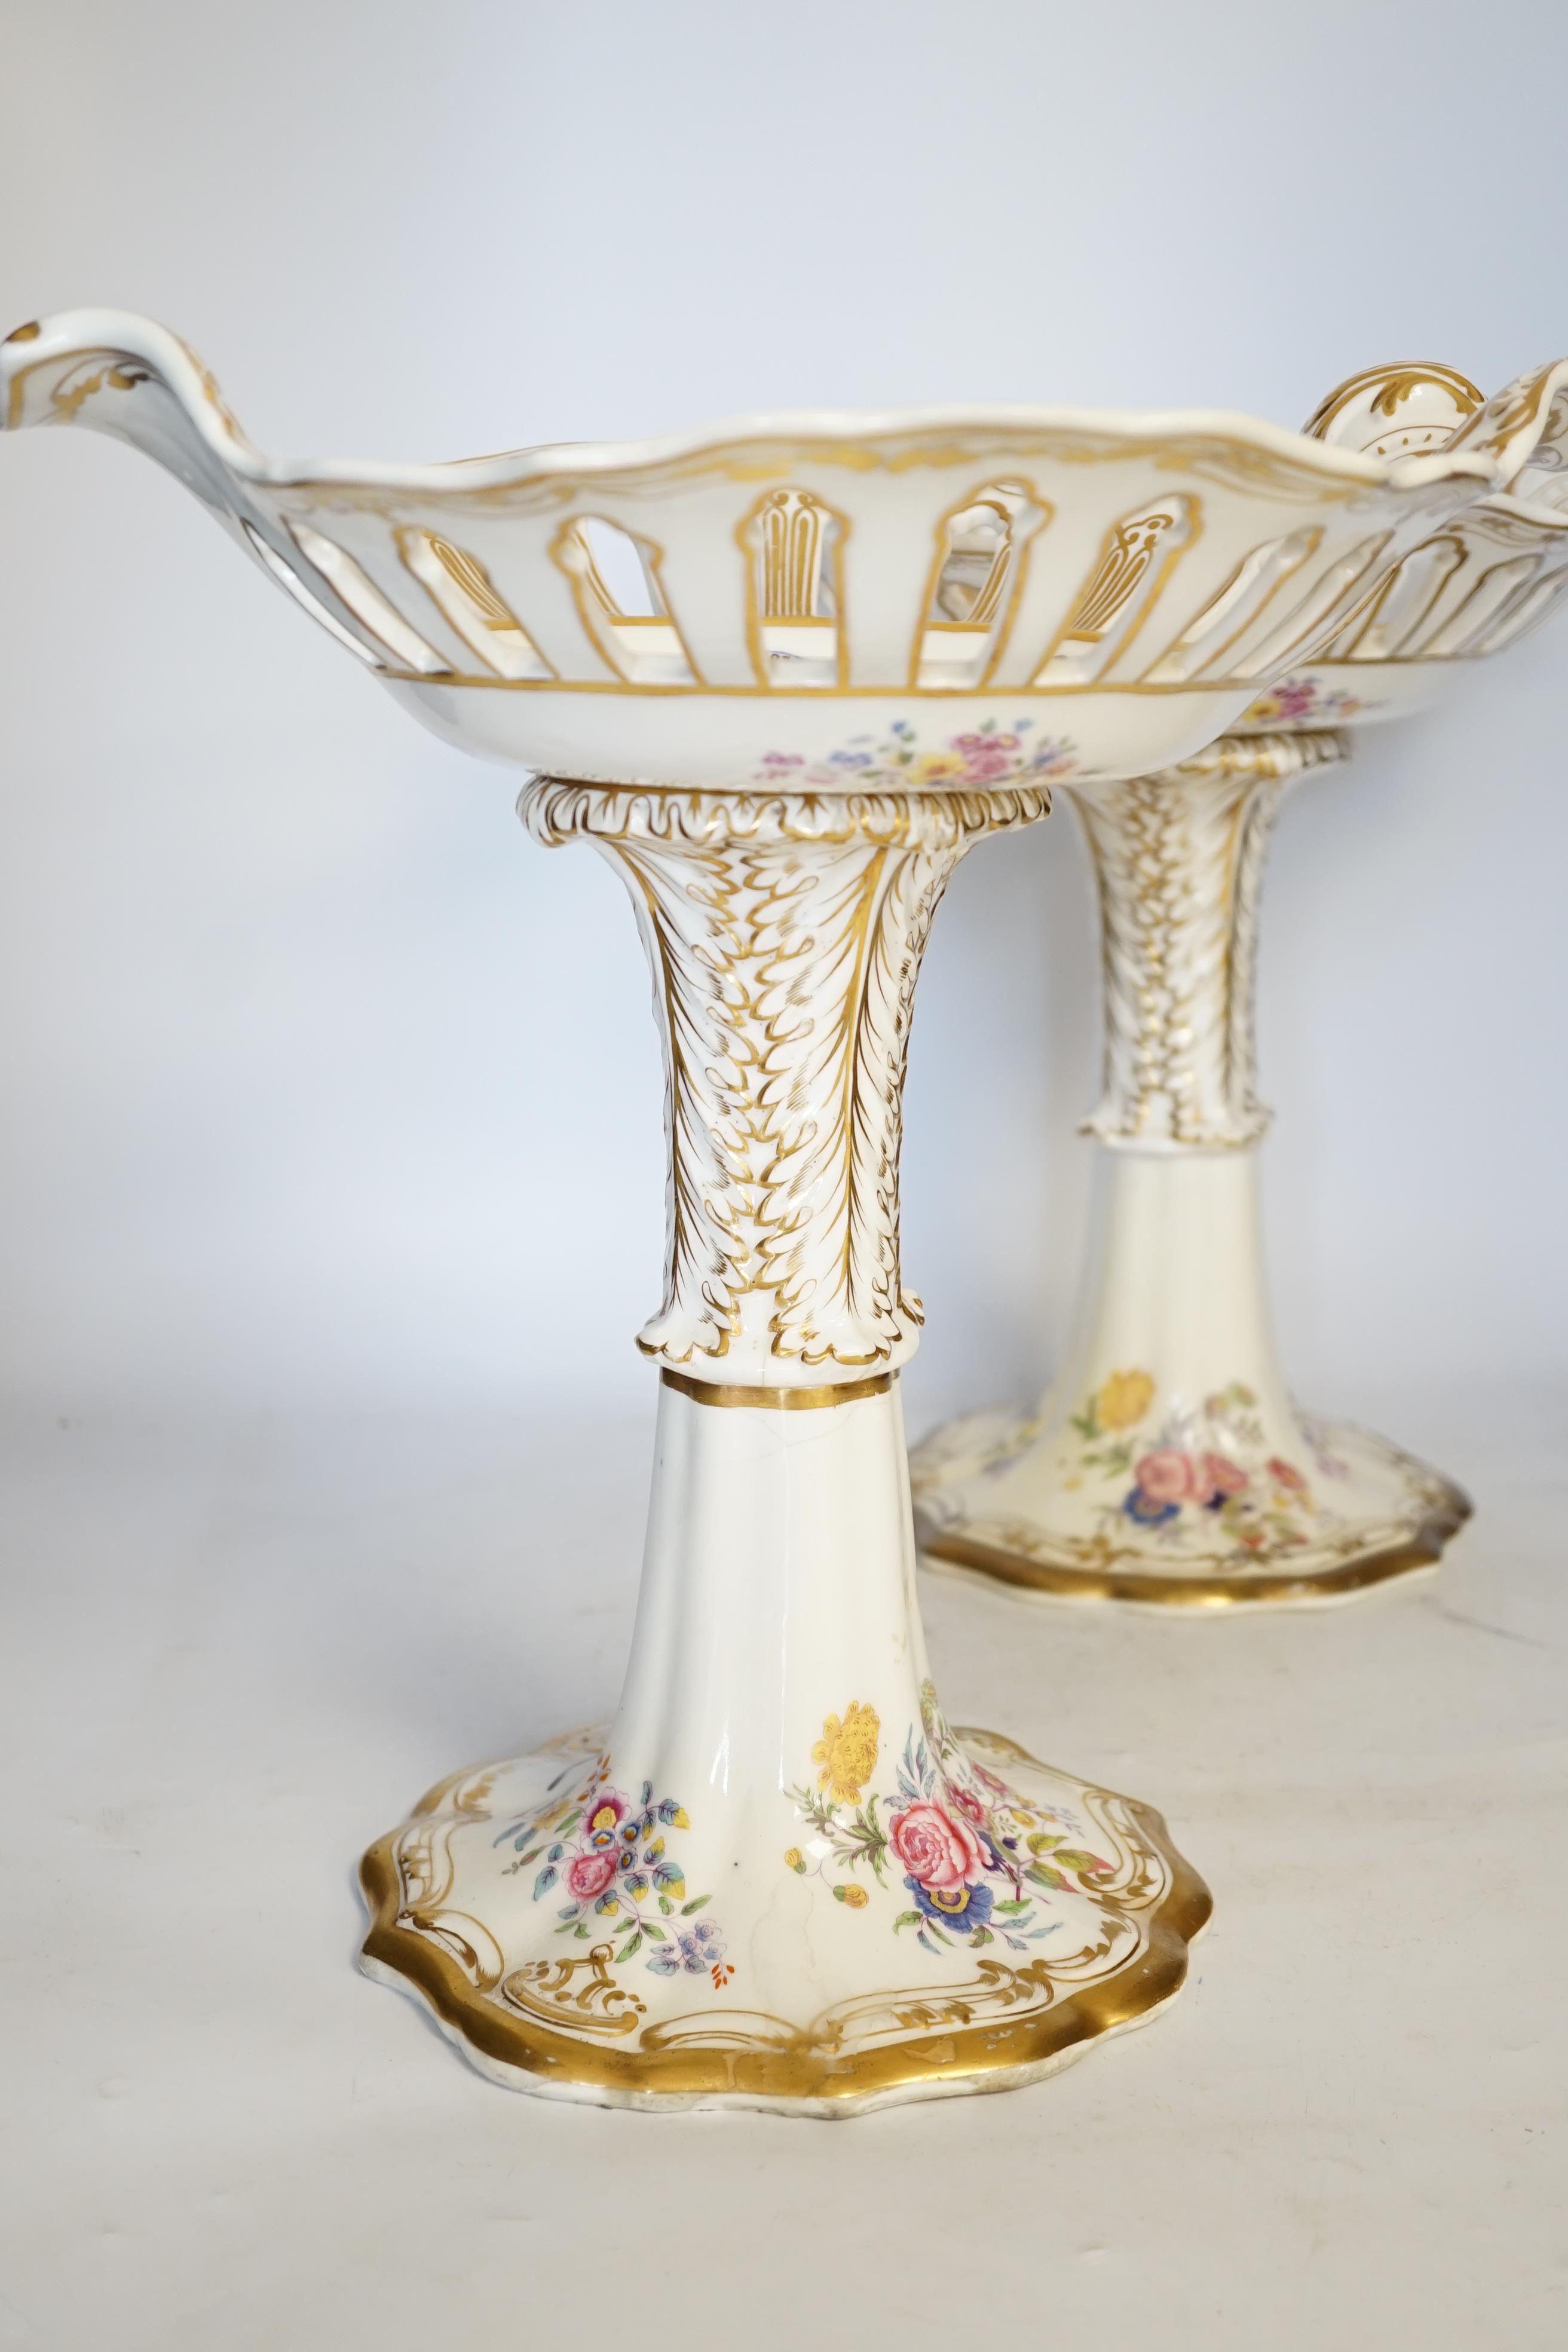 A pair of Copeland & Garrett porcelain crested comports in two parts, c.1840, 33cm. Condition - poor to fair